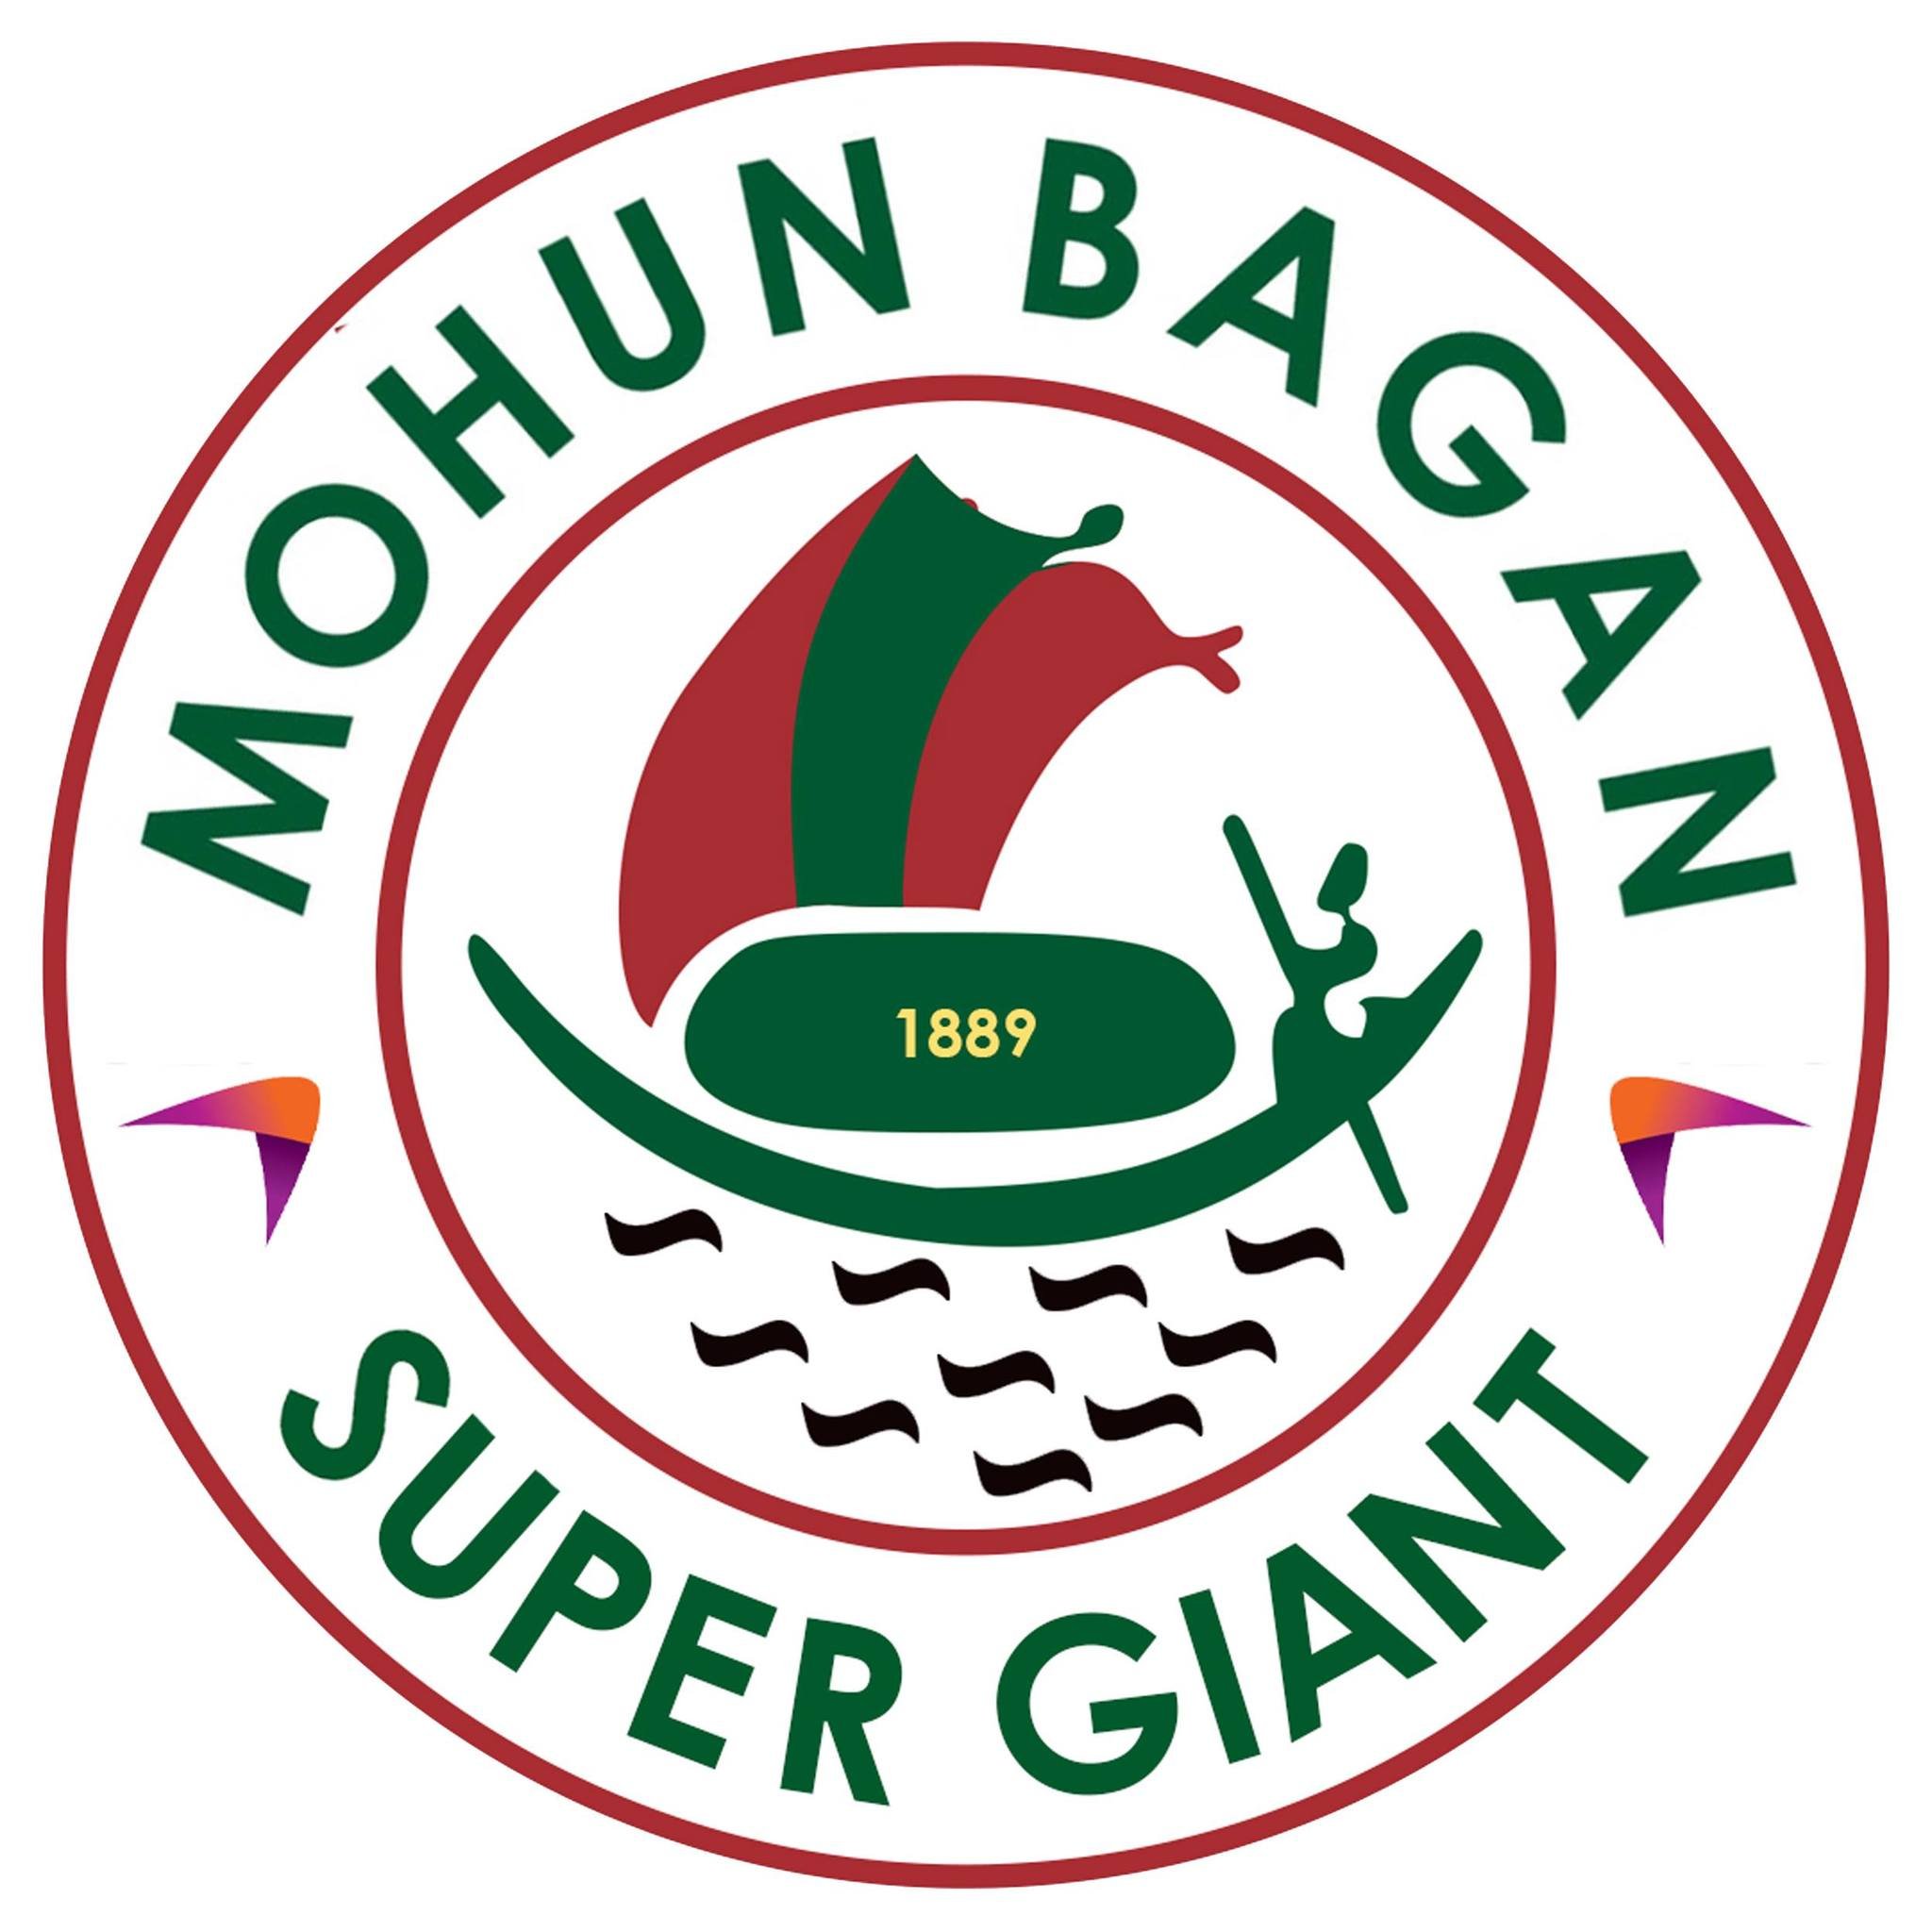 IFTWC - Indian Football on X: "🚨Official Mohun Bagan Super Giant Logo 💚❤️ #MohunBagan https://t.co/TuvXHTbzJY" / X